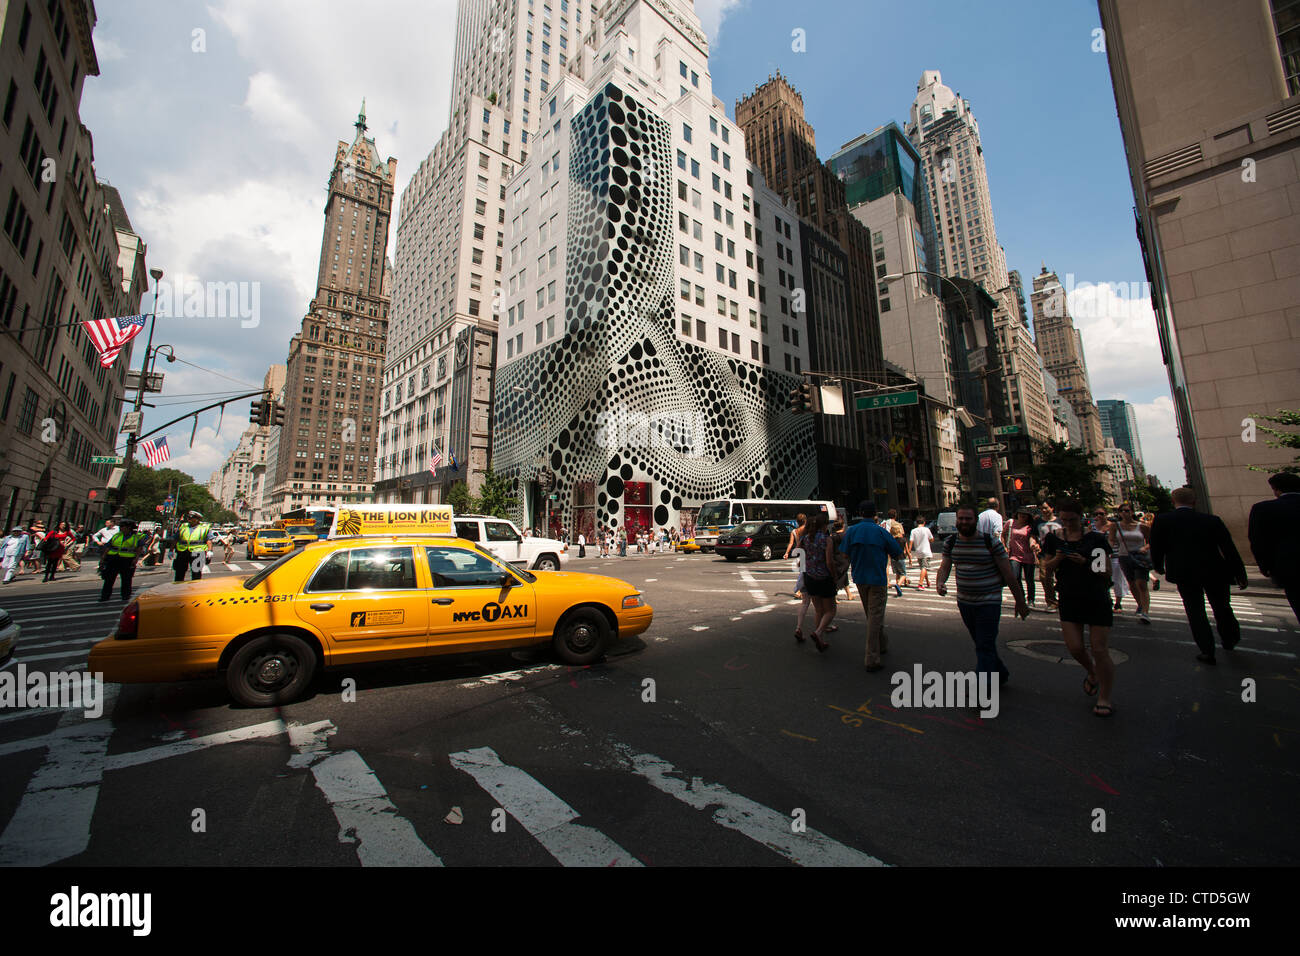 The Louis Vuitton flagship store on Fifth Avenue in New York is Stock Photo: 49462249 - Alamy